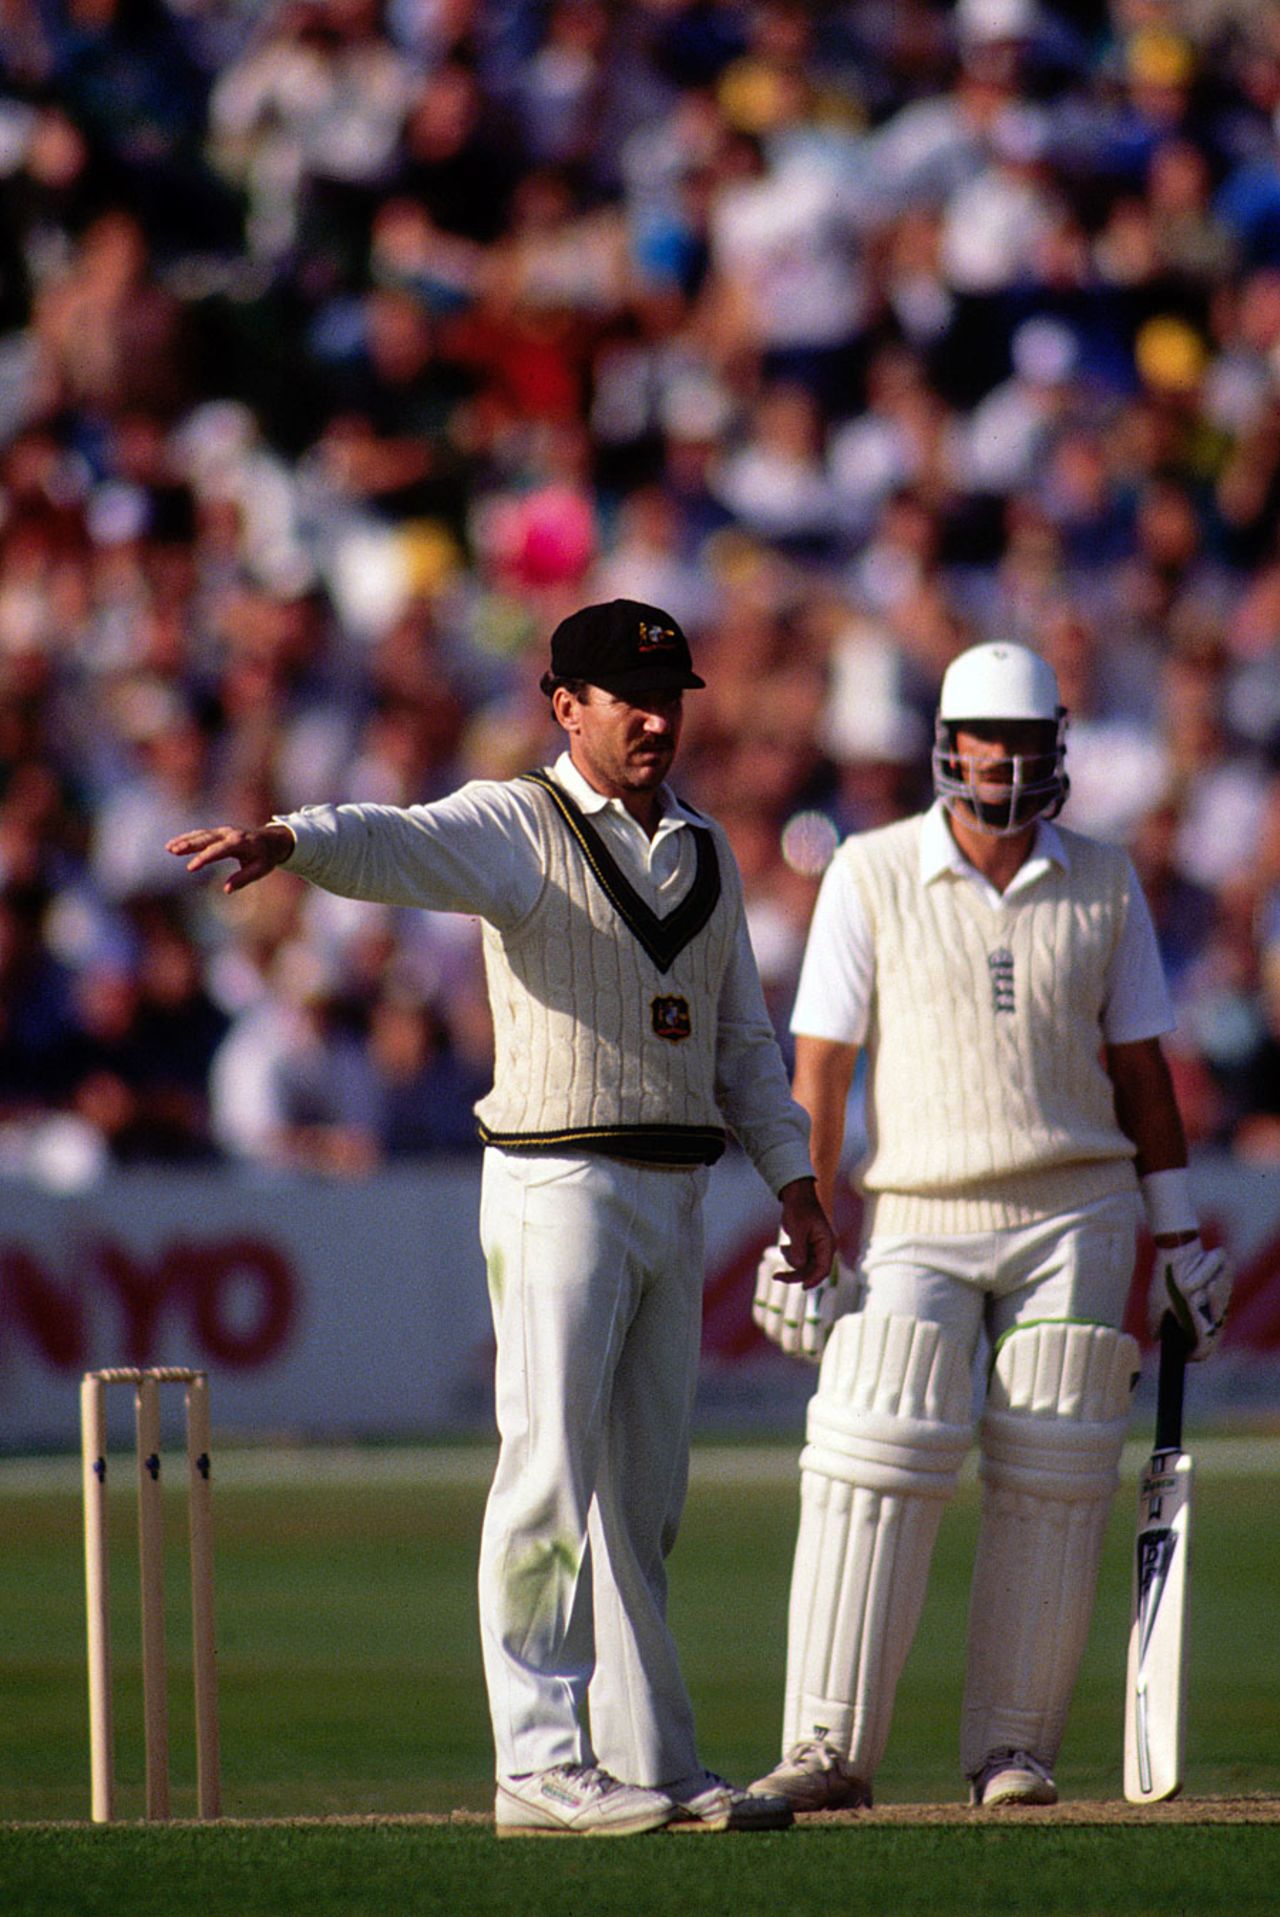 Allan Border sets the field, The Ashes, 5th Test, Trent Bridge, August 10, 1989